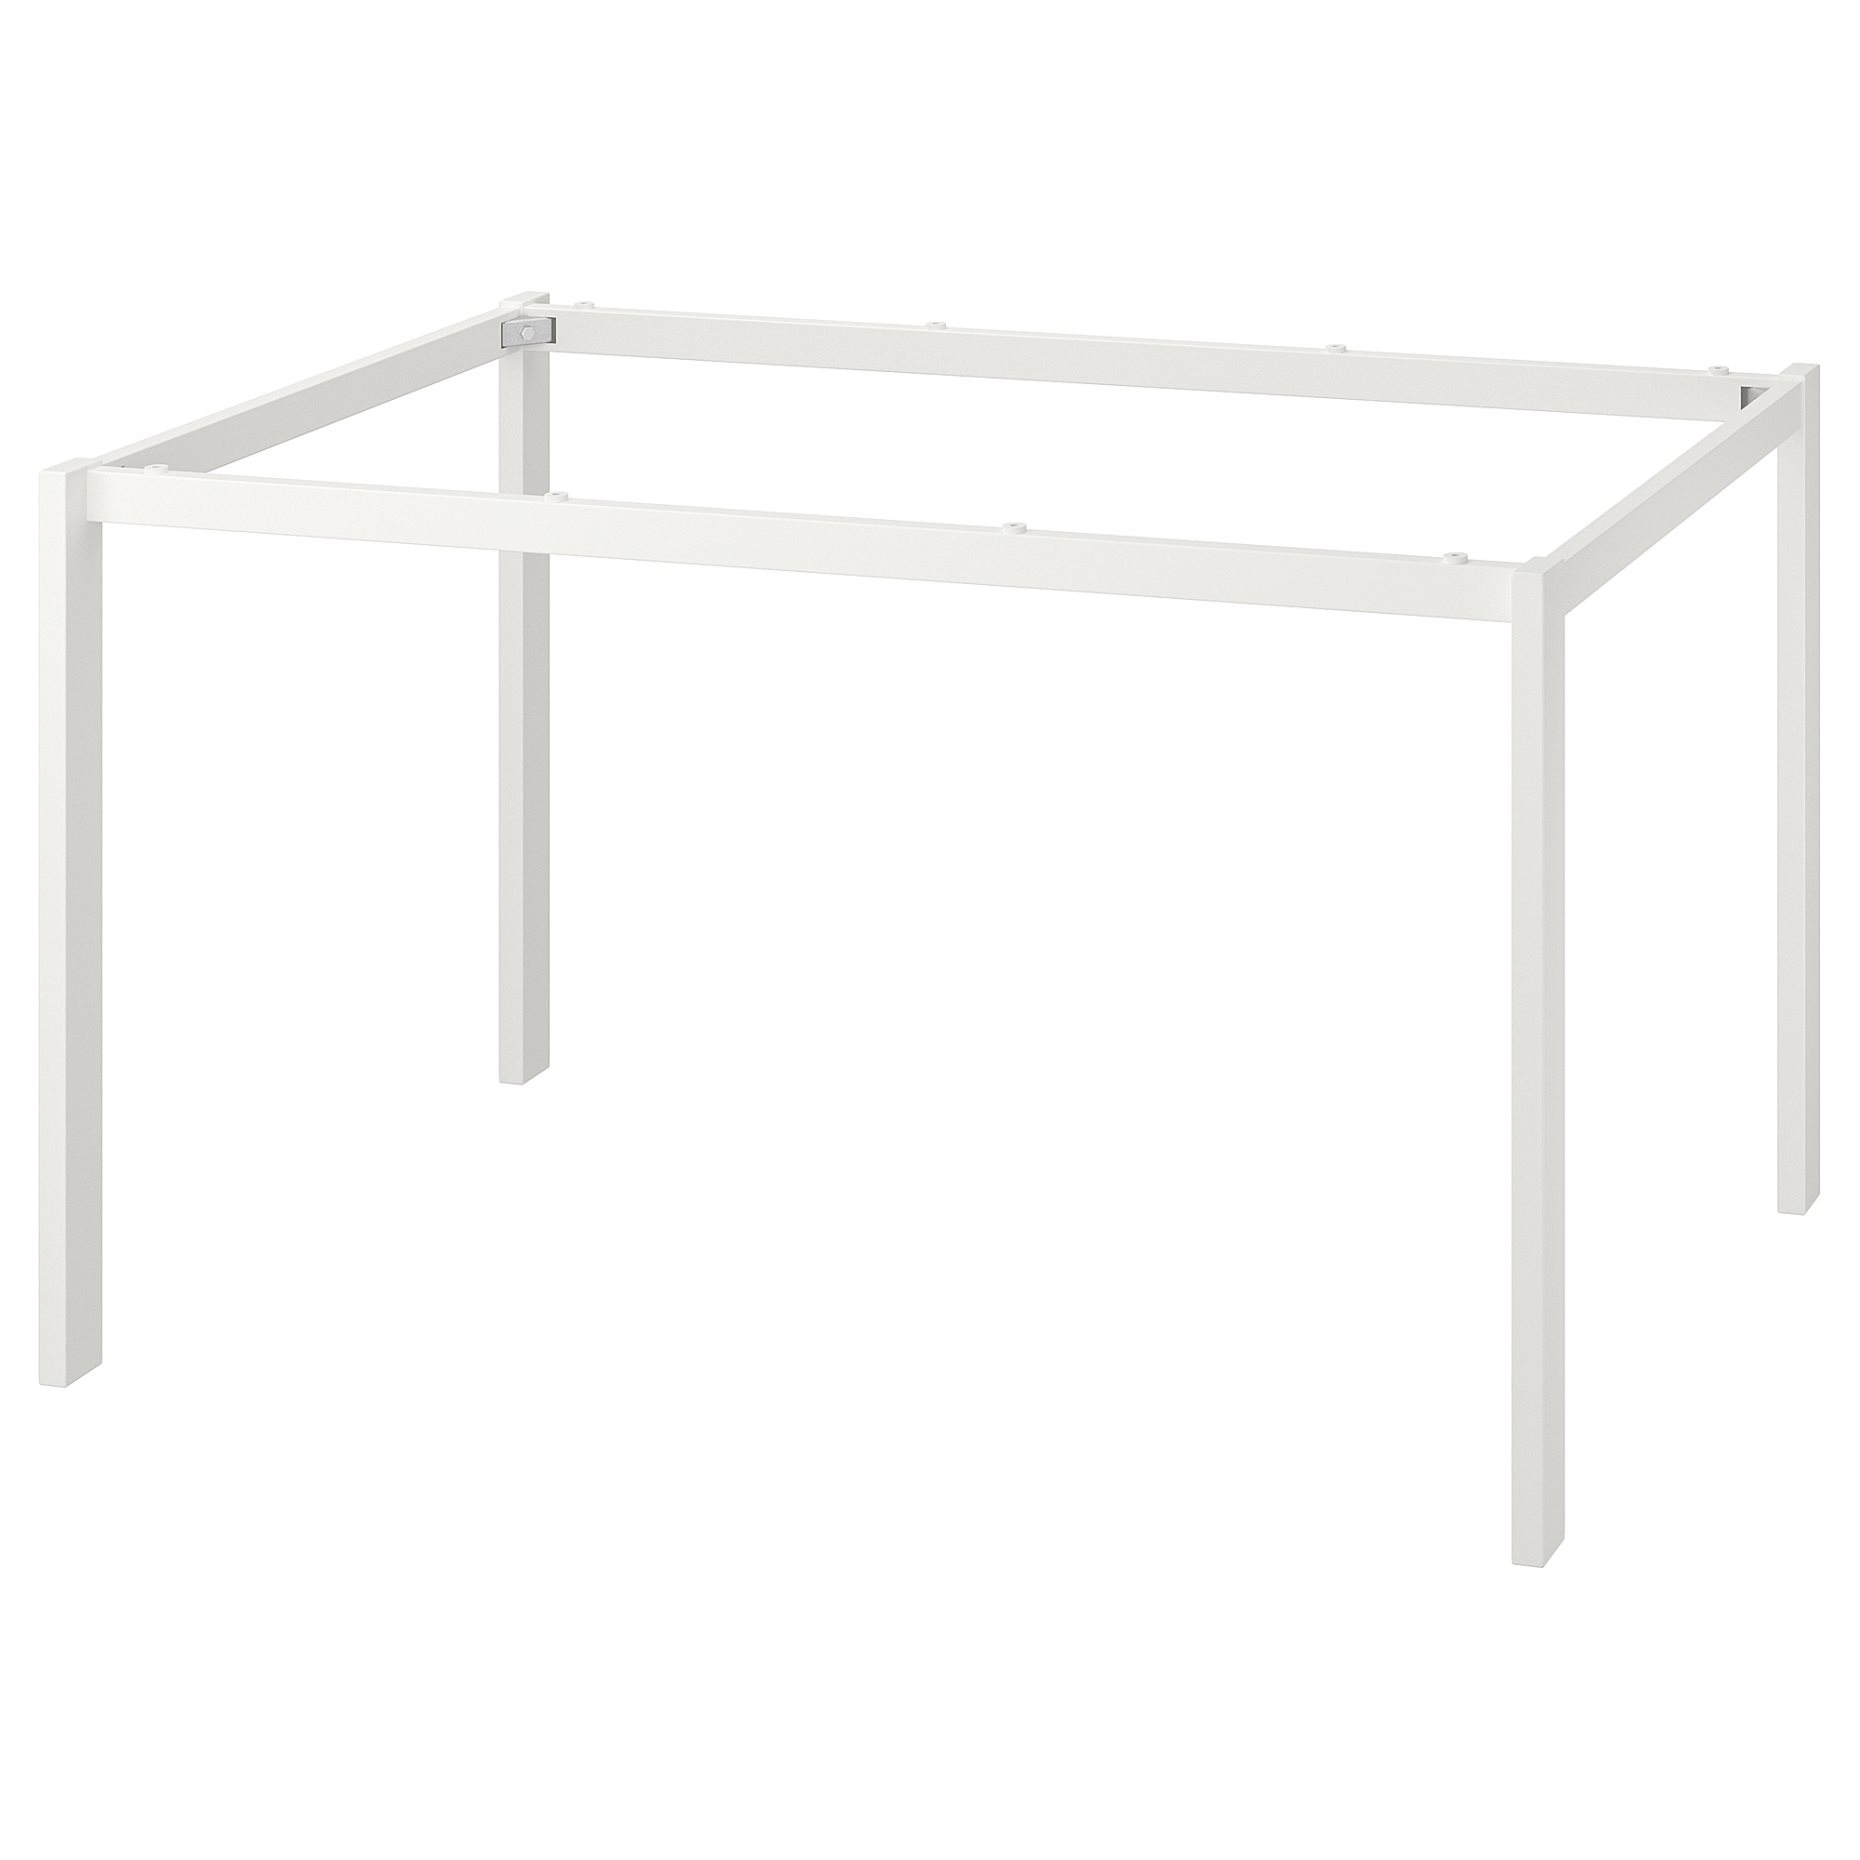 MELLTORP/KATTIL, table and 4 chairs, 125 cm, 594.282.03